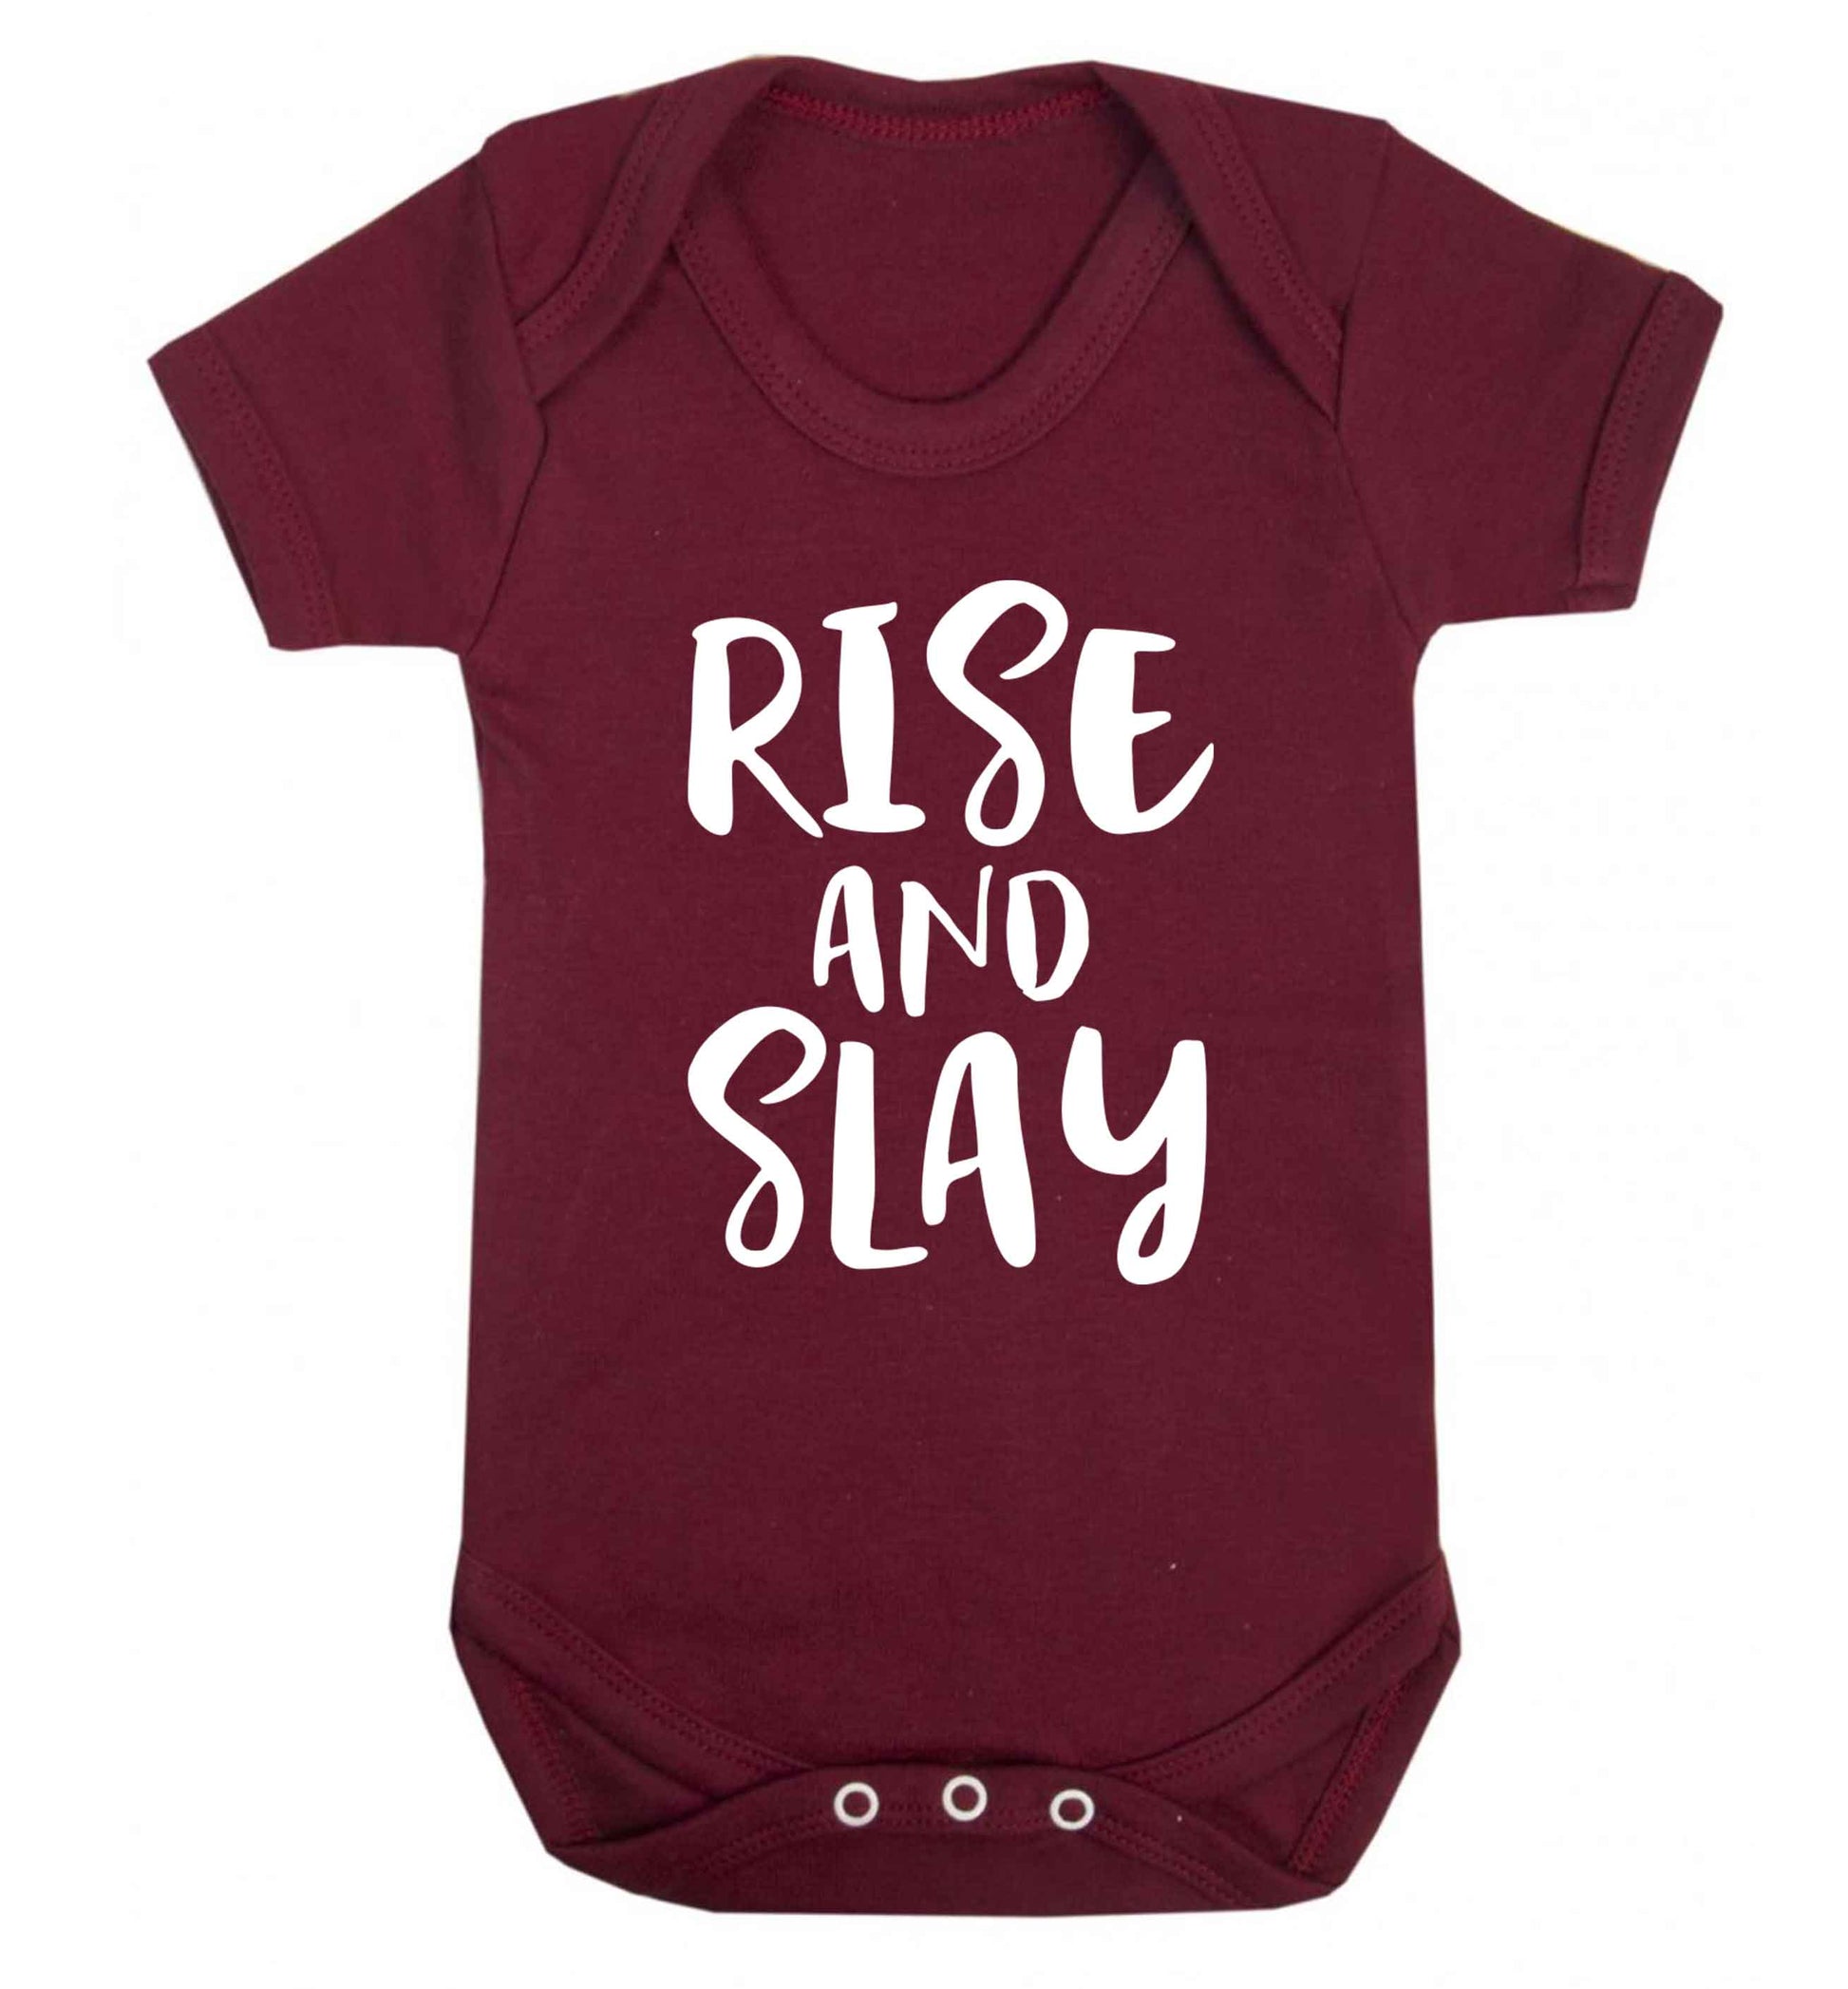 Rise and slay Baby Vest maroon 18-24 months